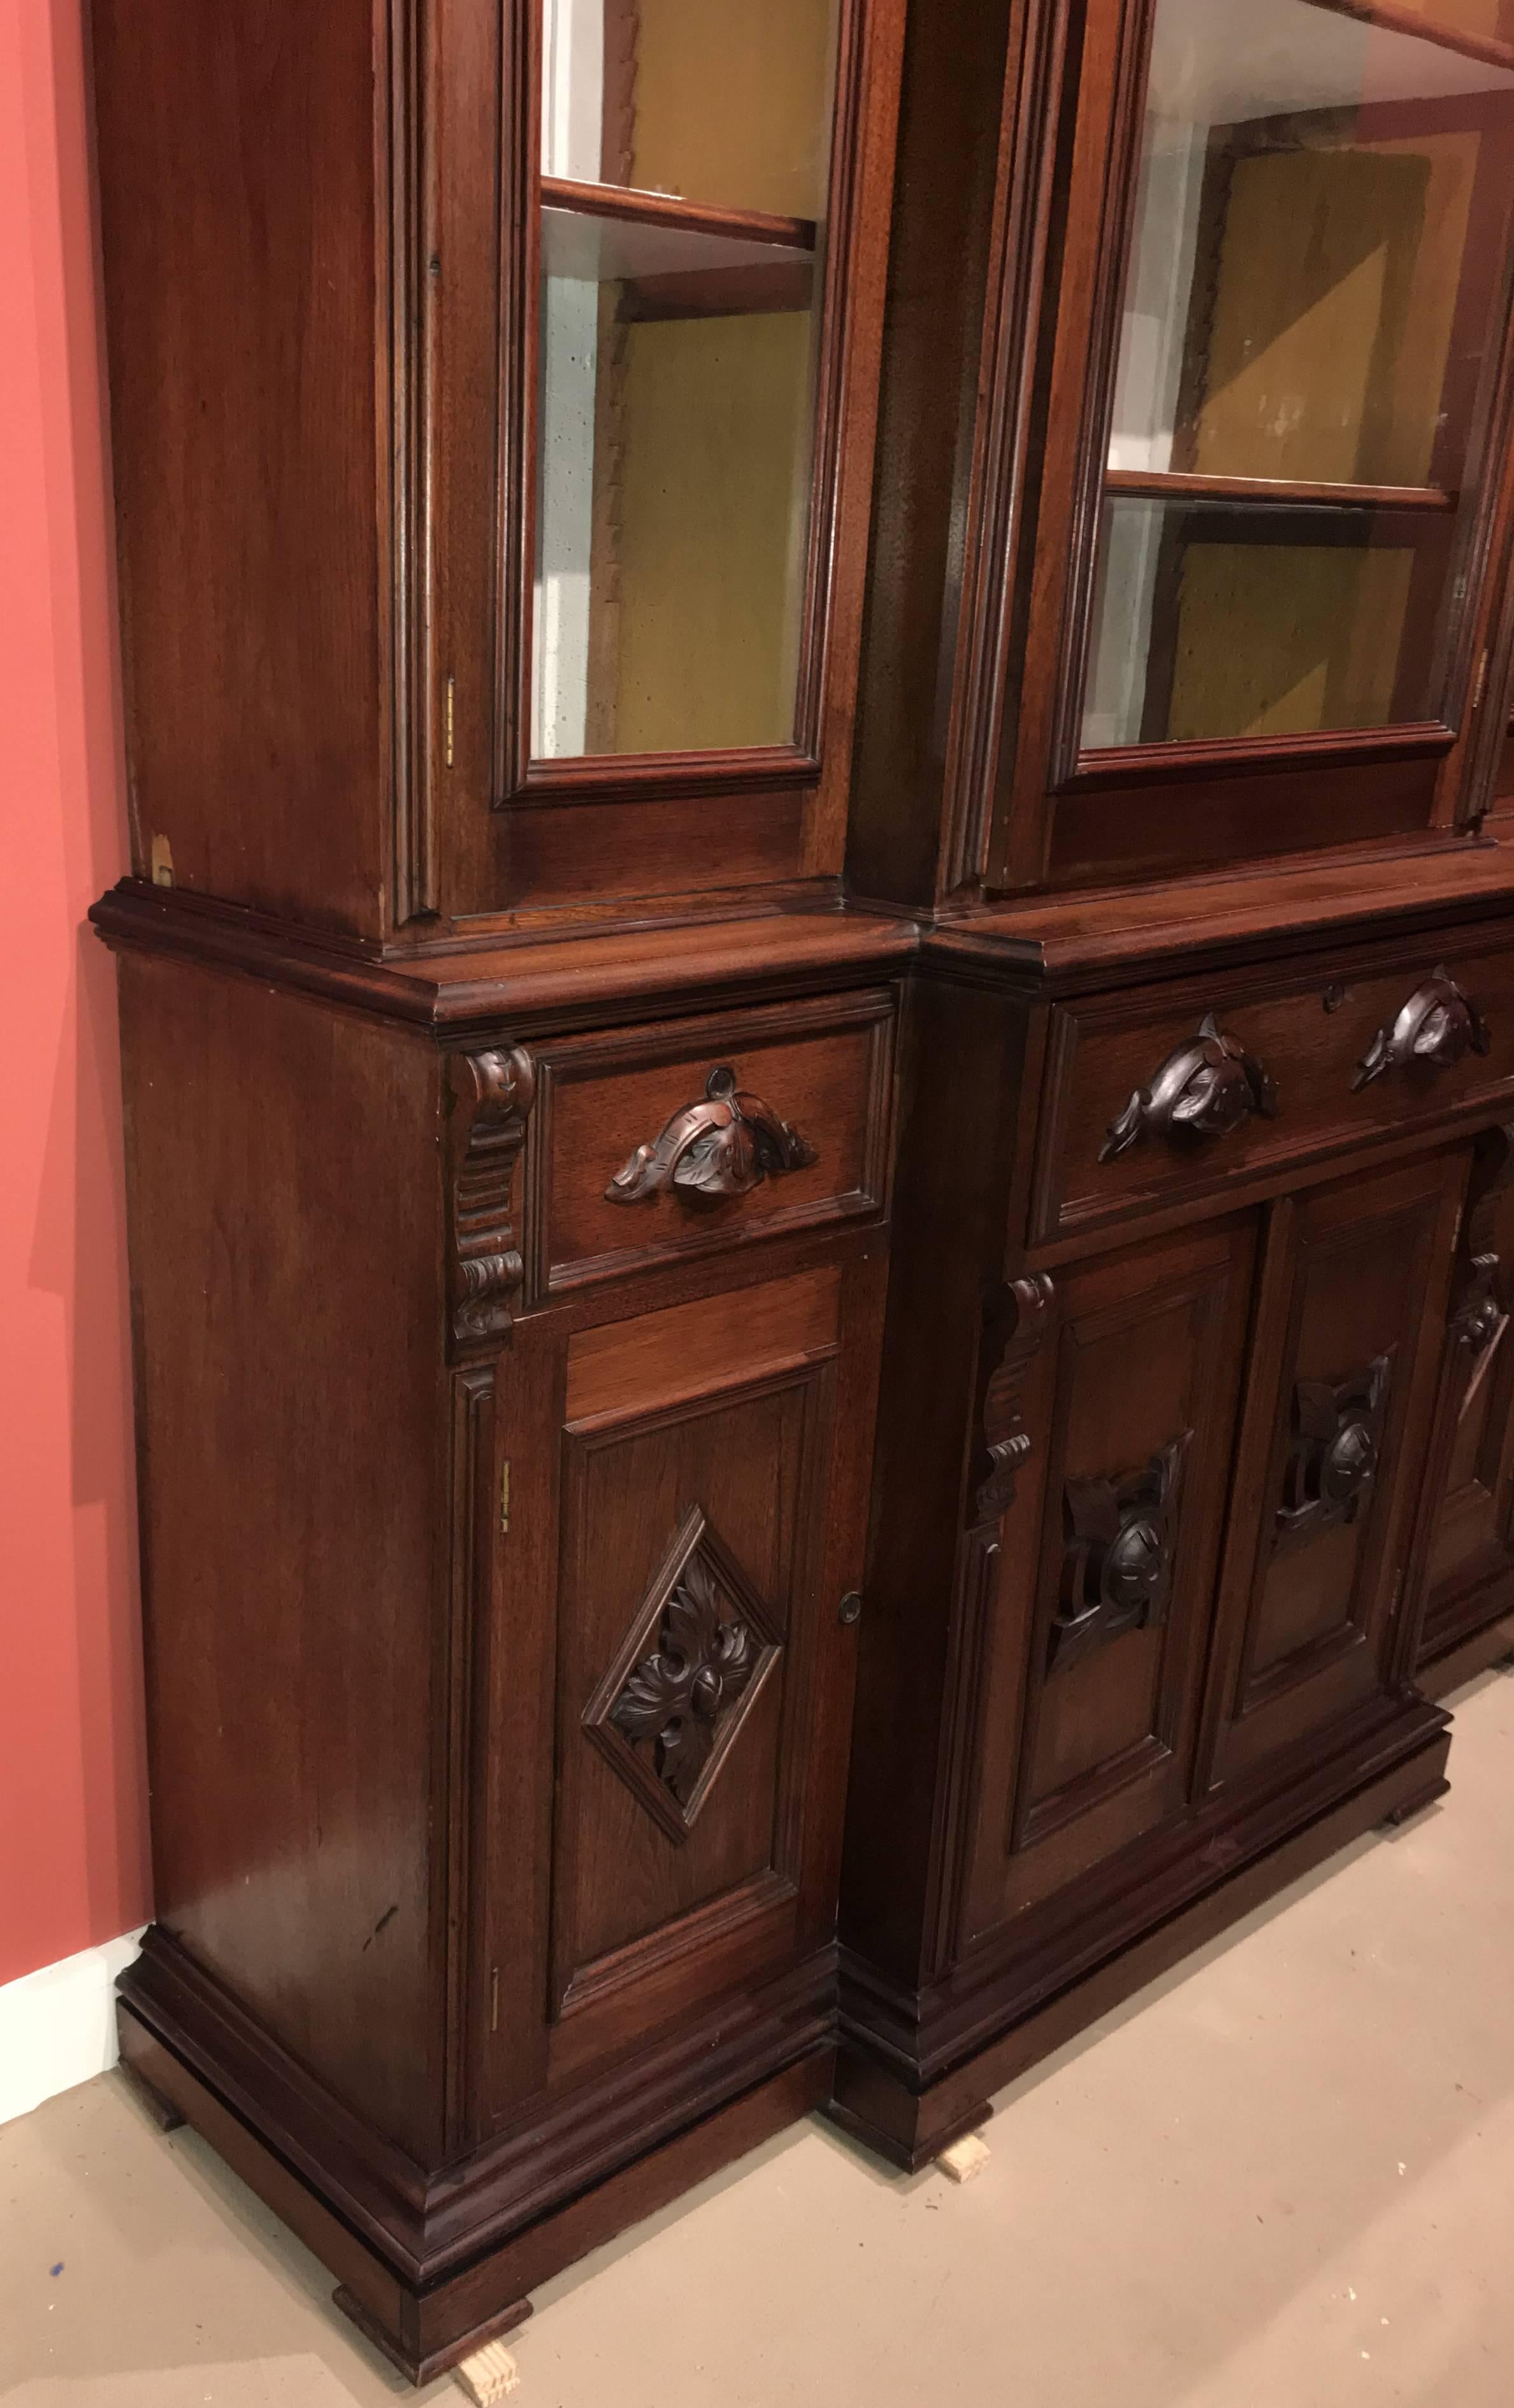 19th Century Renaissance Revival Victorian Glazed and Carved Walnut Cabinet or Bookcase